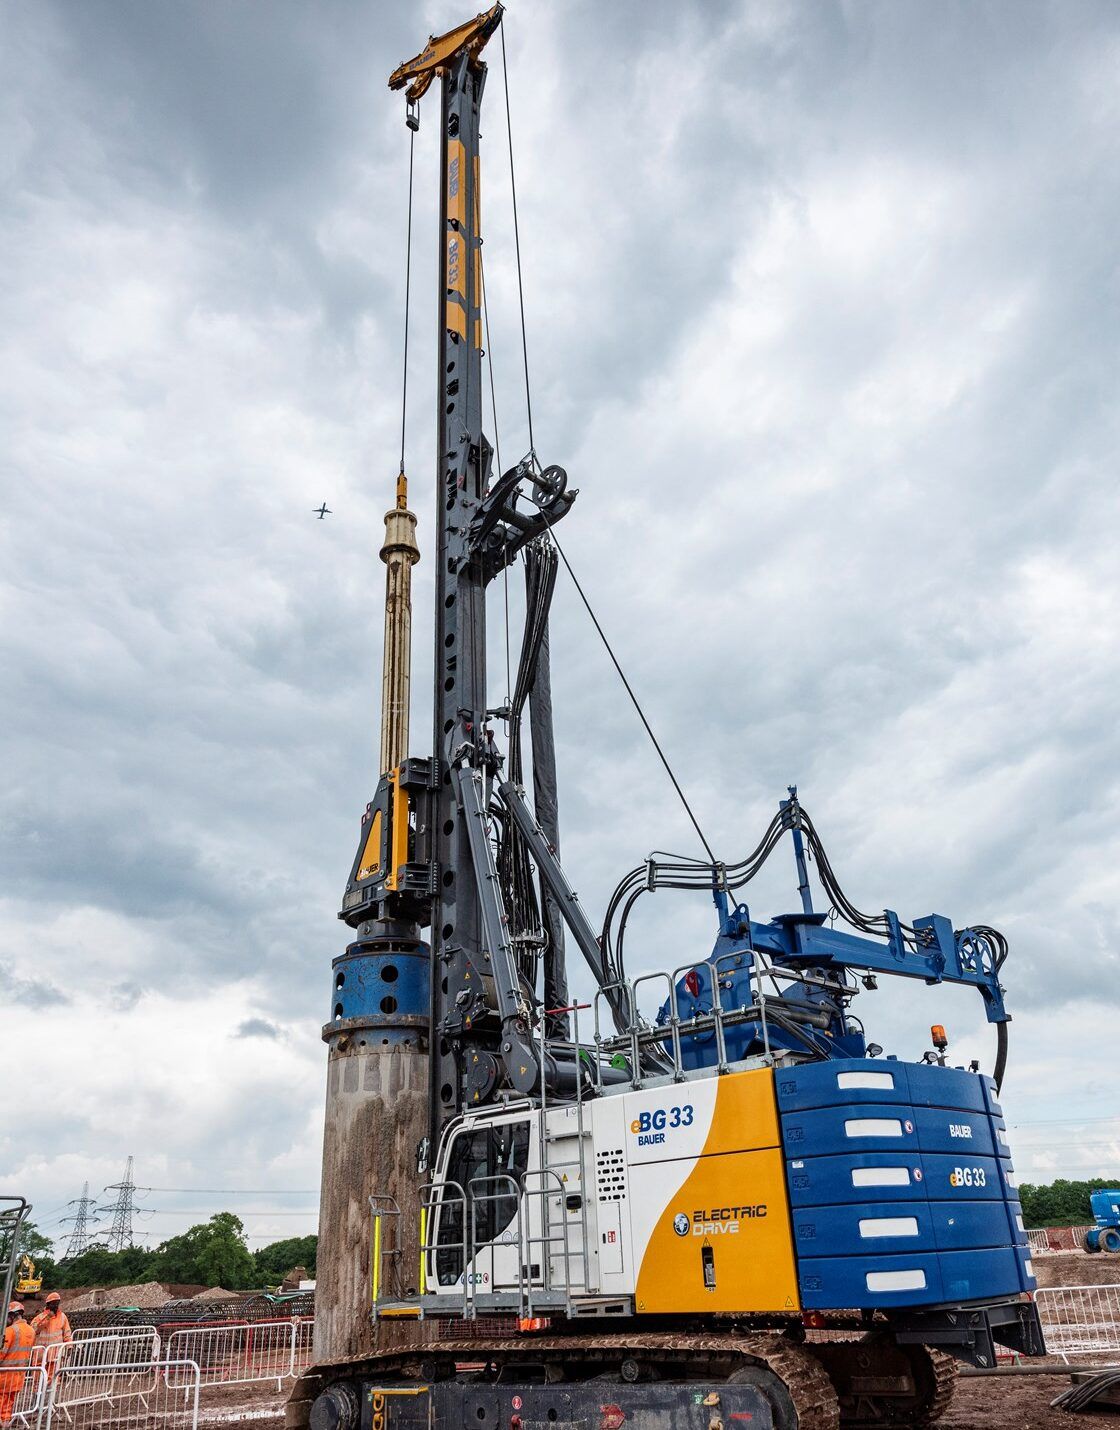 HS2 Trials 'First of a Kind' Electric Drilling Rig